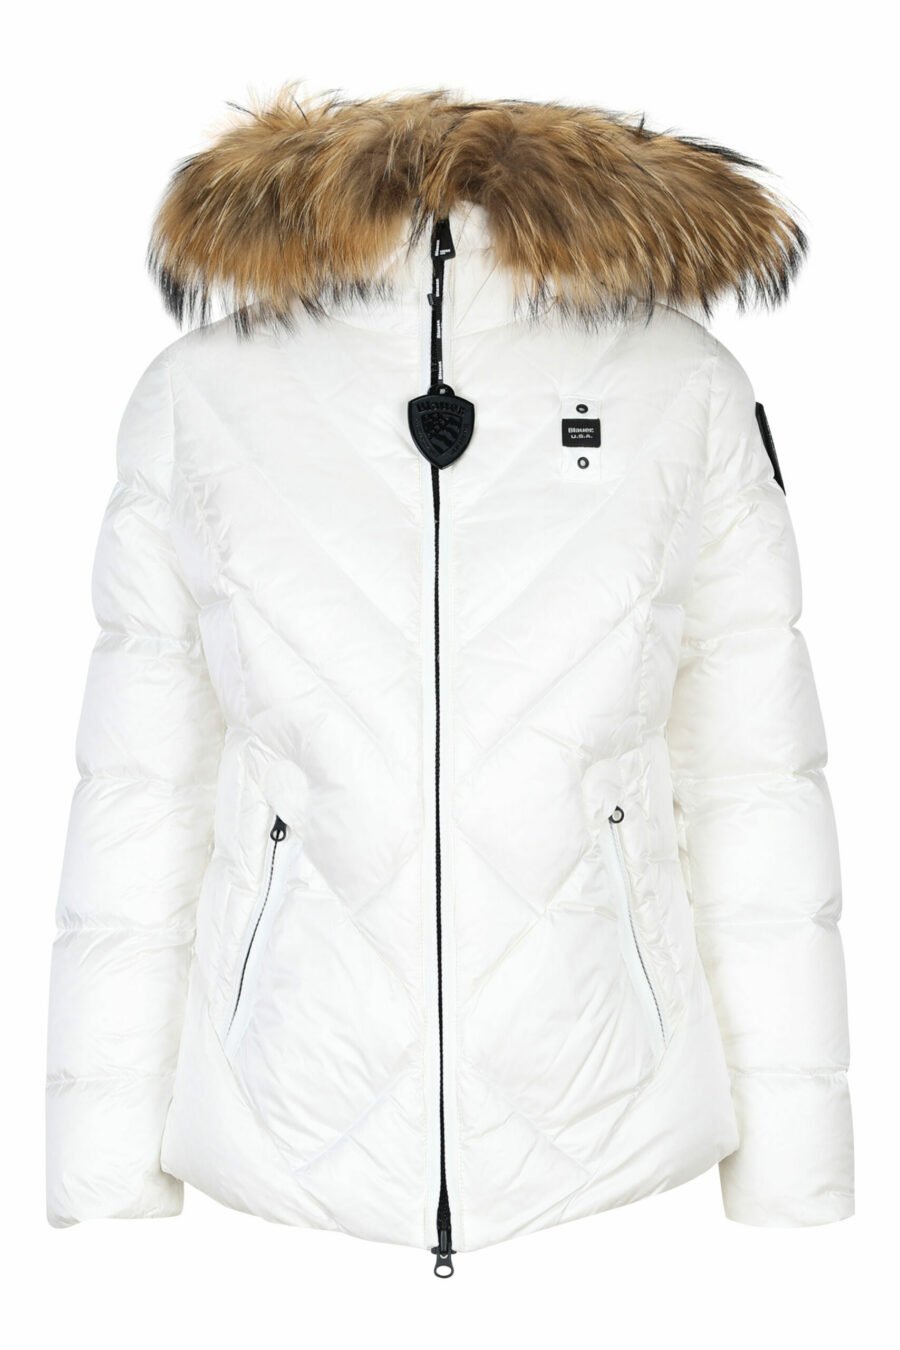 White hooded jacket with fur hood and diagonal lines and beige lining - 8058610678791 scaled